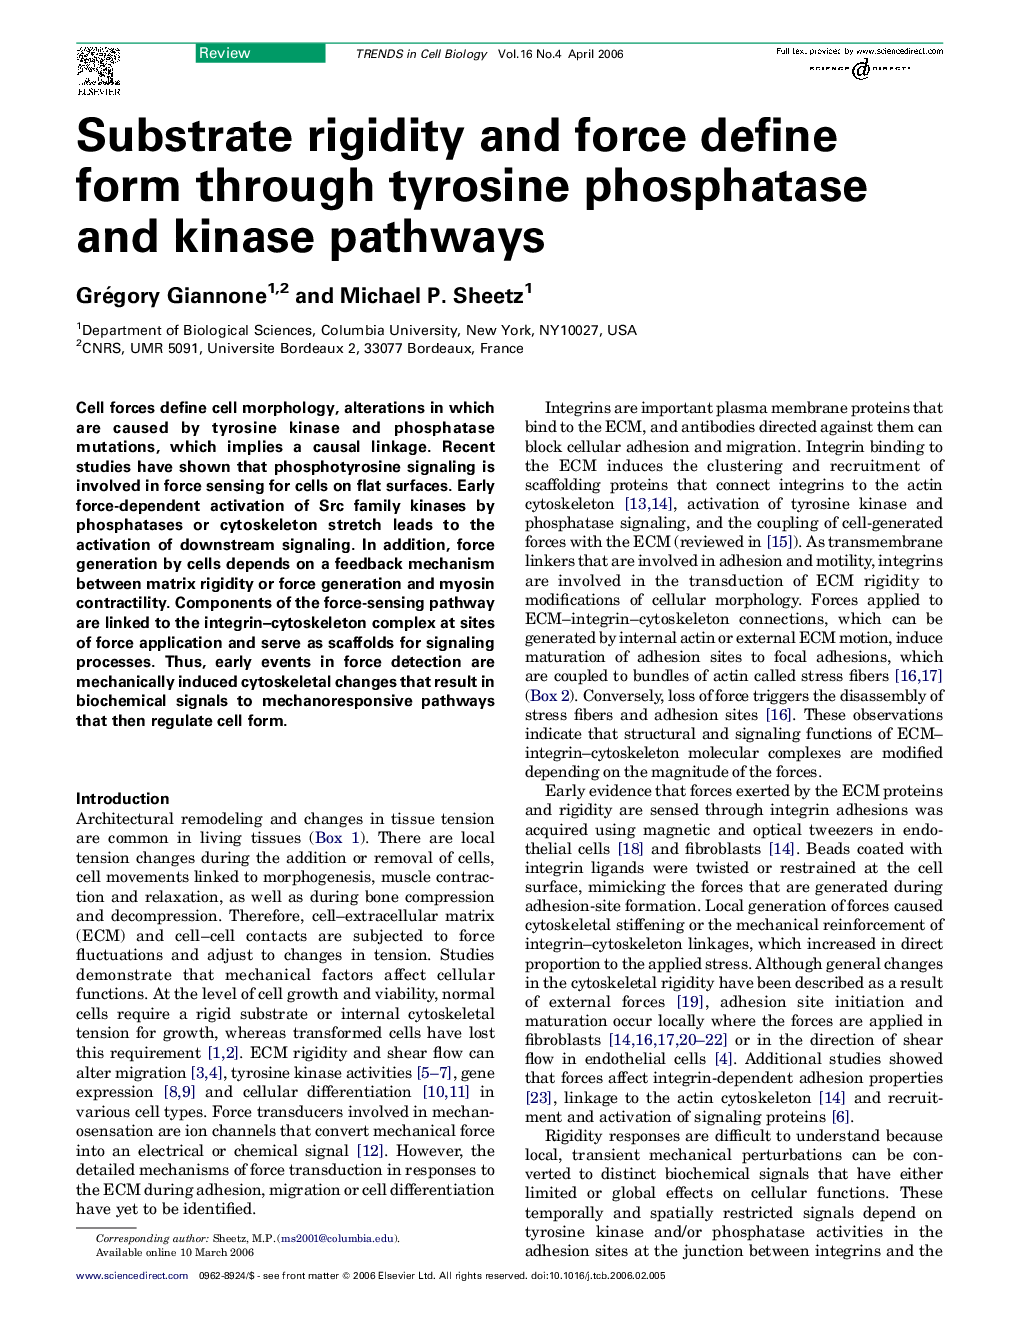 Substrate rigidity and force define form through tyrosine phosphatase and kinase pathways